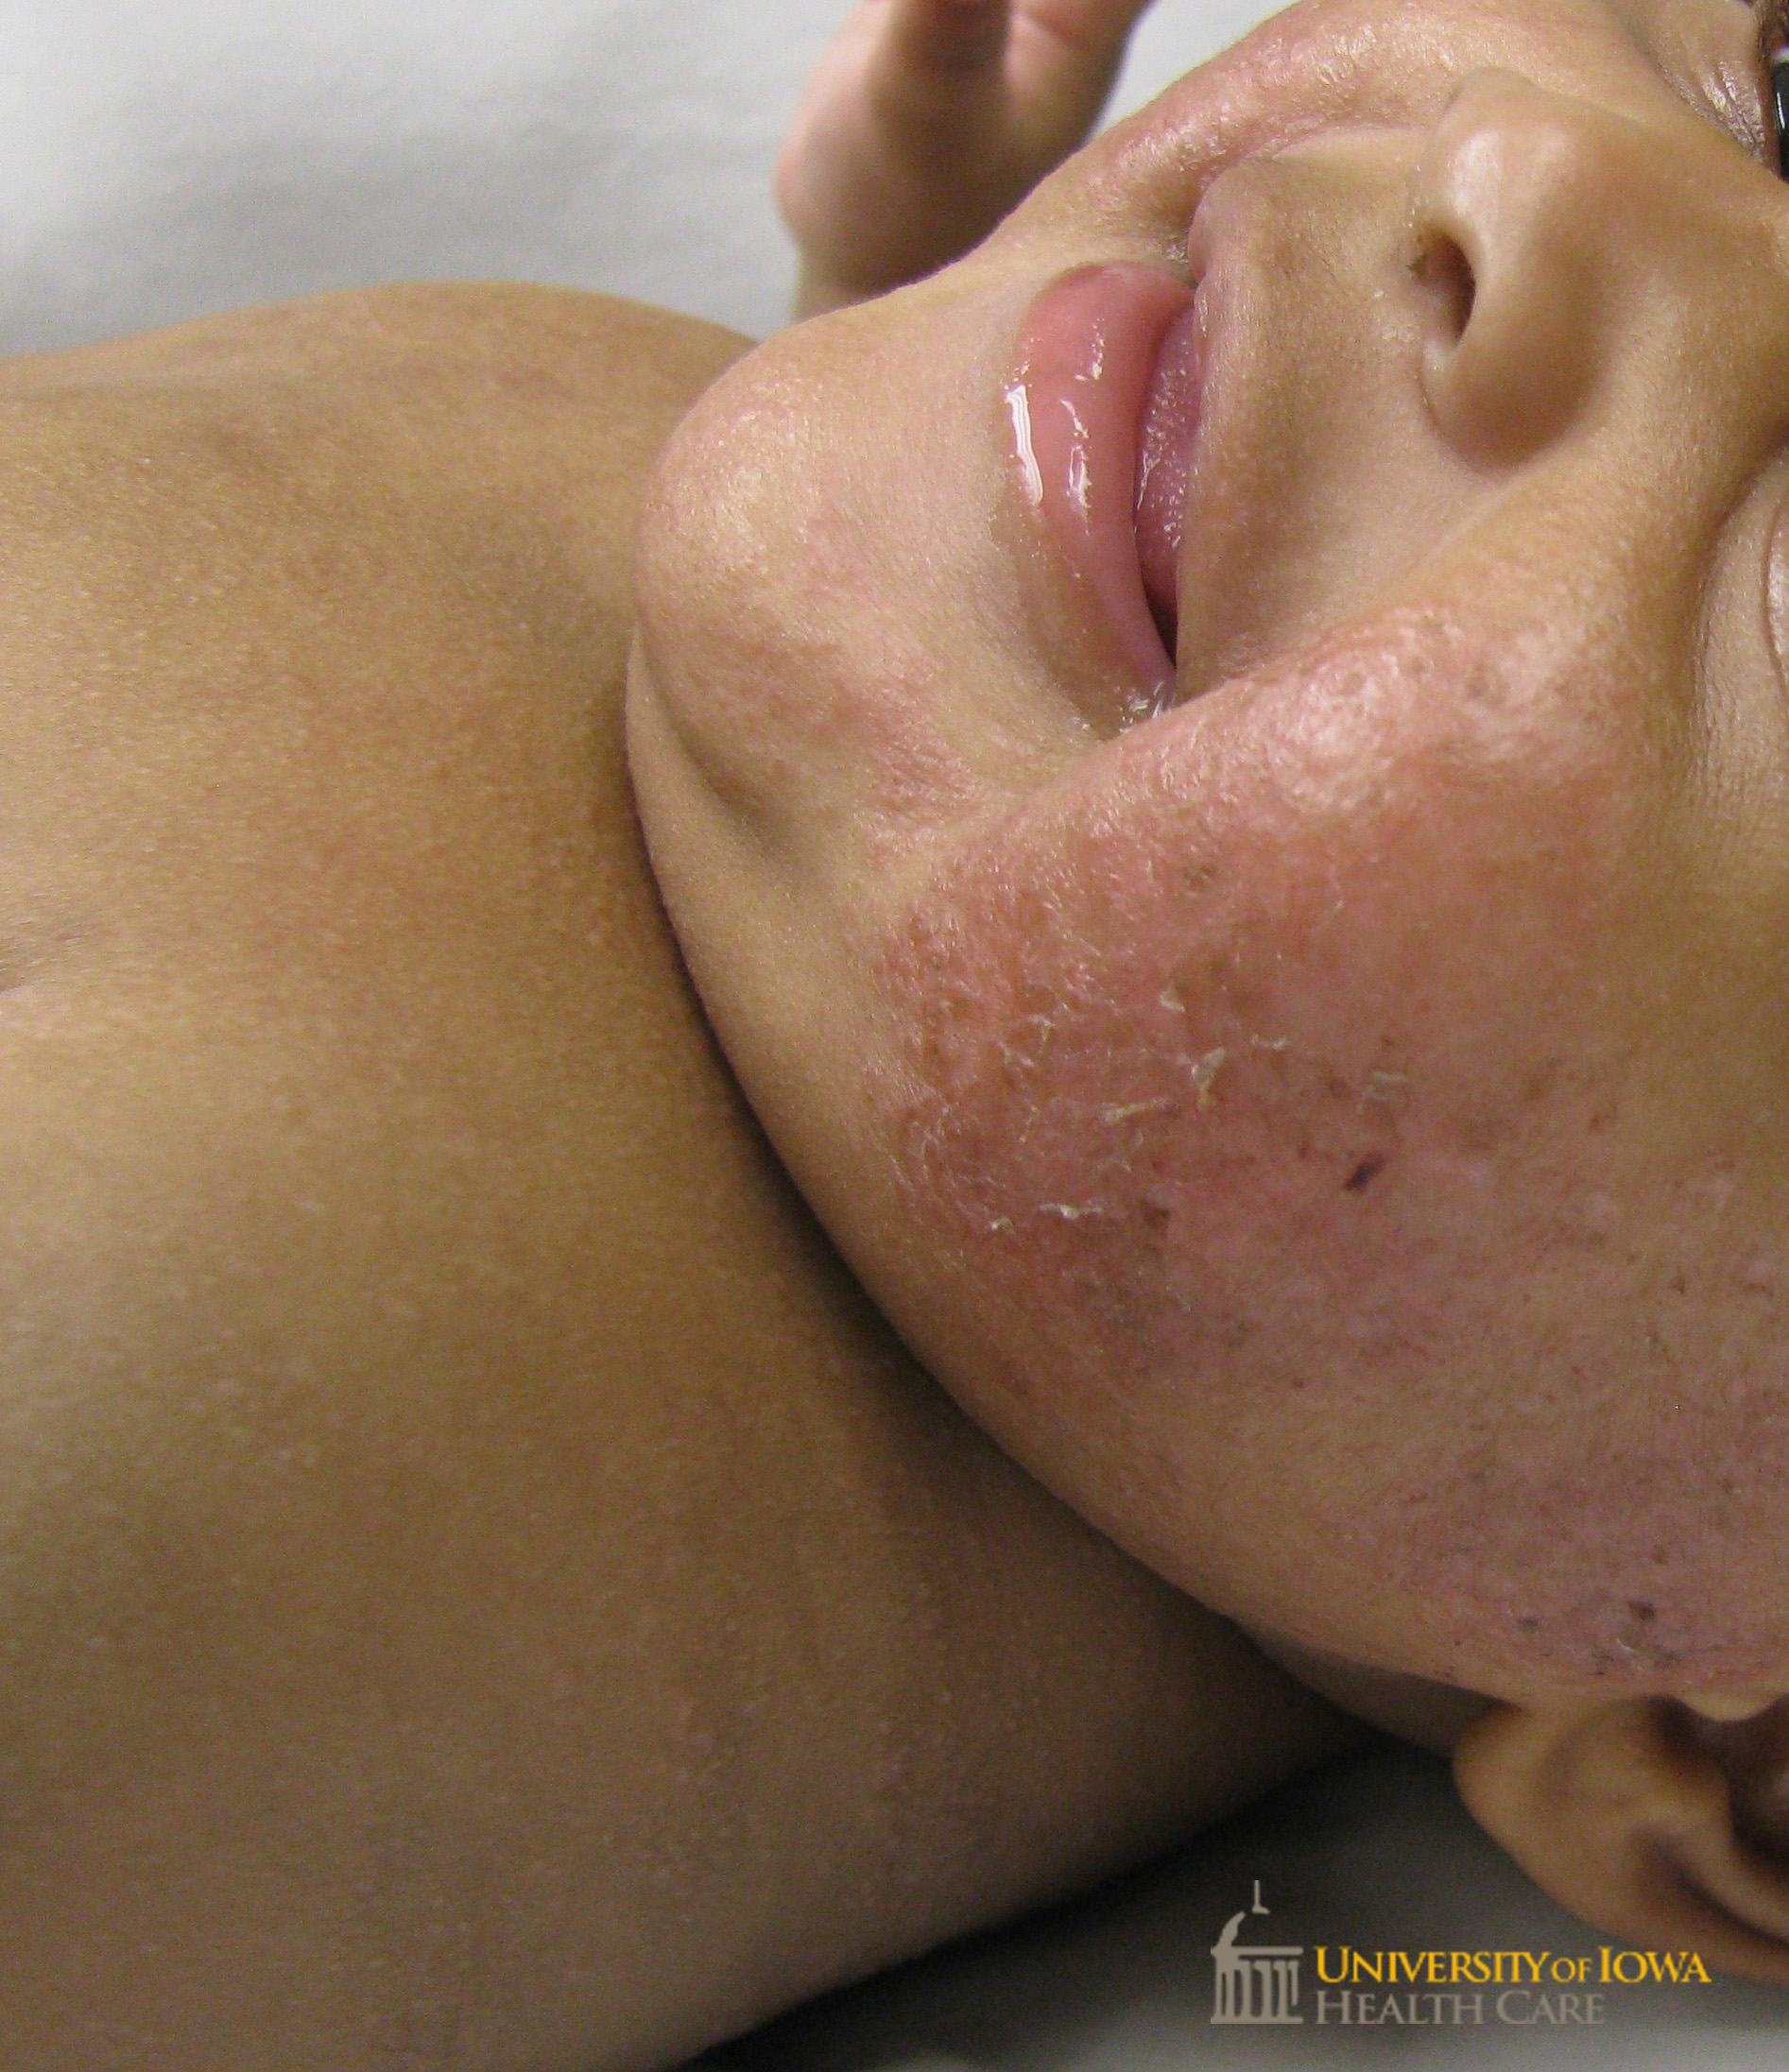 Erythematous scaly plaques on the cheeks. (click images for higher resolution).